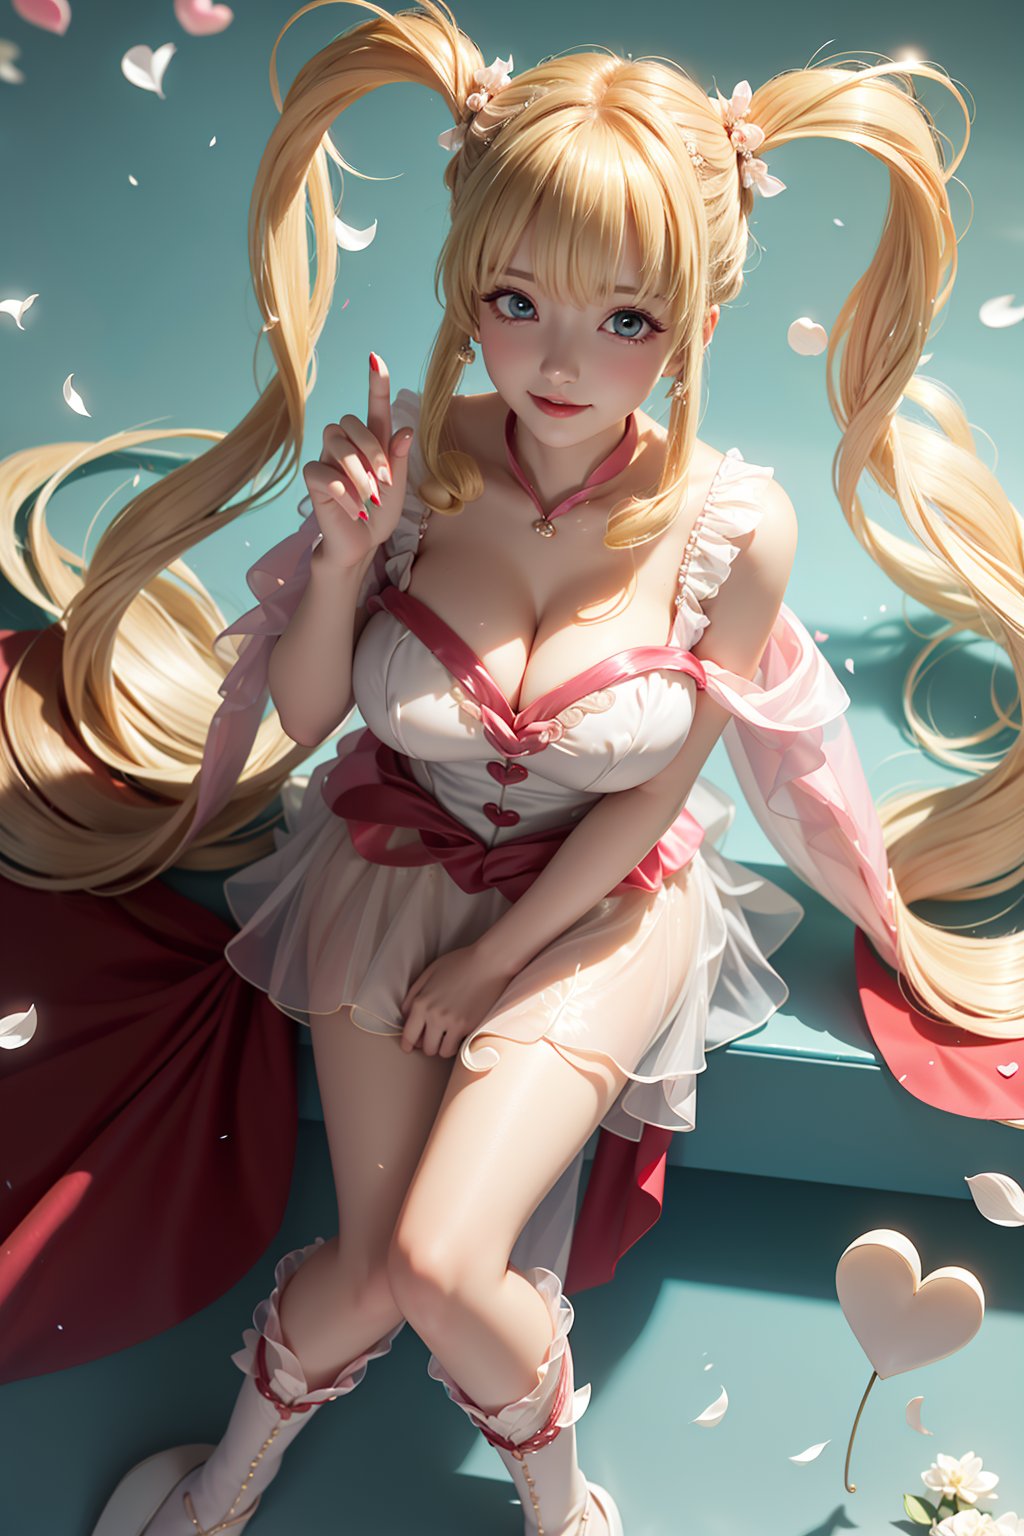 ((from above, exposed breasts, duck sitting, She wears revealing pink frilled weeding dress, Wedding gown (veil), blond very long hair, Heart-shaped twintails, large breasts 2.0)), cute pose, large breasts, cleavage , blue eyes, (Masterpiece), full body shot, best quality, high resolution, highly detailed, detailed background, movie lighting, 1girl, idol, underbust, stage, stage lights, music, blush, sweet smile, sweat, concert, ruffles, confetti, hearts, hair accessories, hair bows, gems, jewelry, neon lights , bow tie , pointing, spotlight, sparkles, light particles, frame breasts, cross lace, white stockings,ryuubi,lift skirt,1girl,seethrough_wedding_dress,seethrough_china_dress, red and gold dress,Angel,spartanarmor,red cape,long hair,hmnl,fr4ctal4rmor,office_lady_uniform,reiko_aiwaifu,QIPAO,qipao,enome_futokunoguild,ｍenesu, twintails